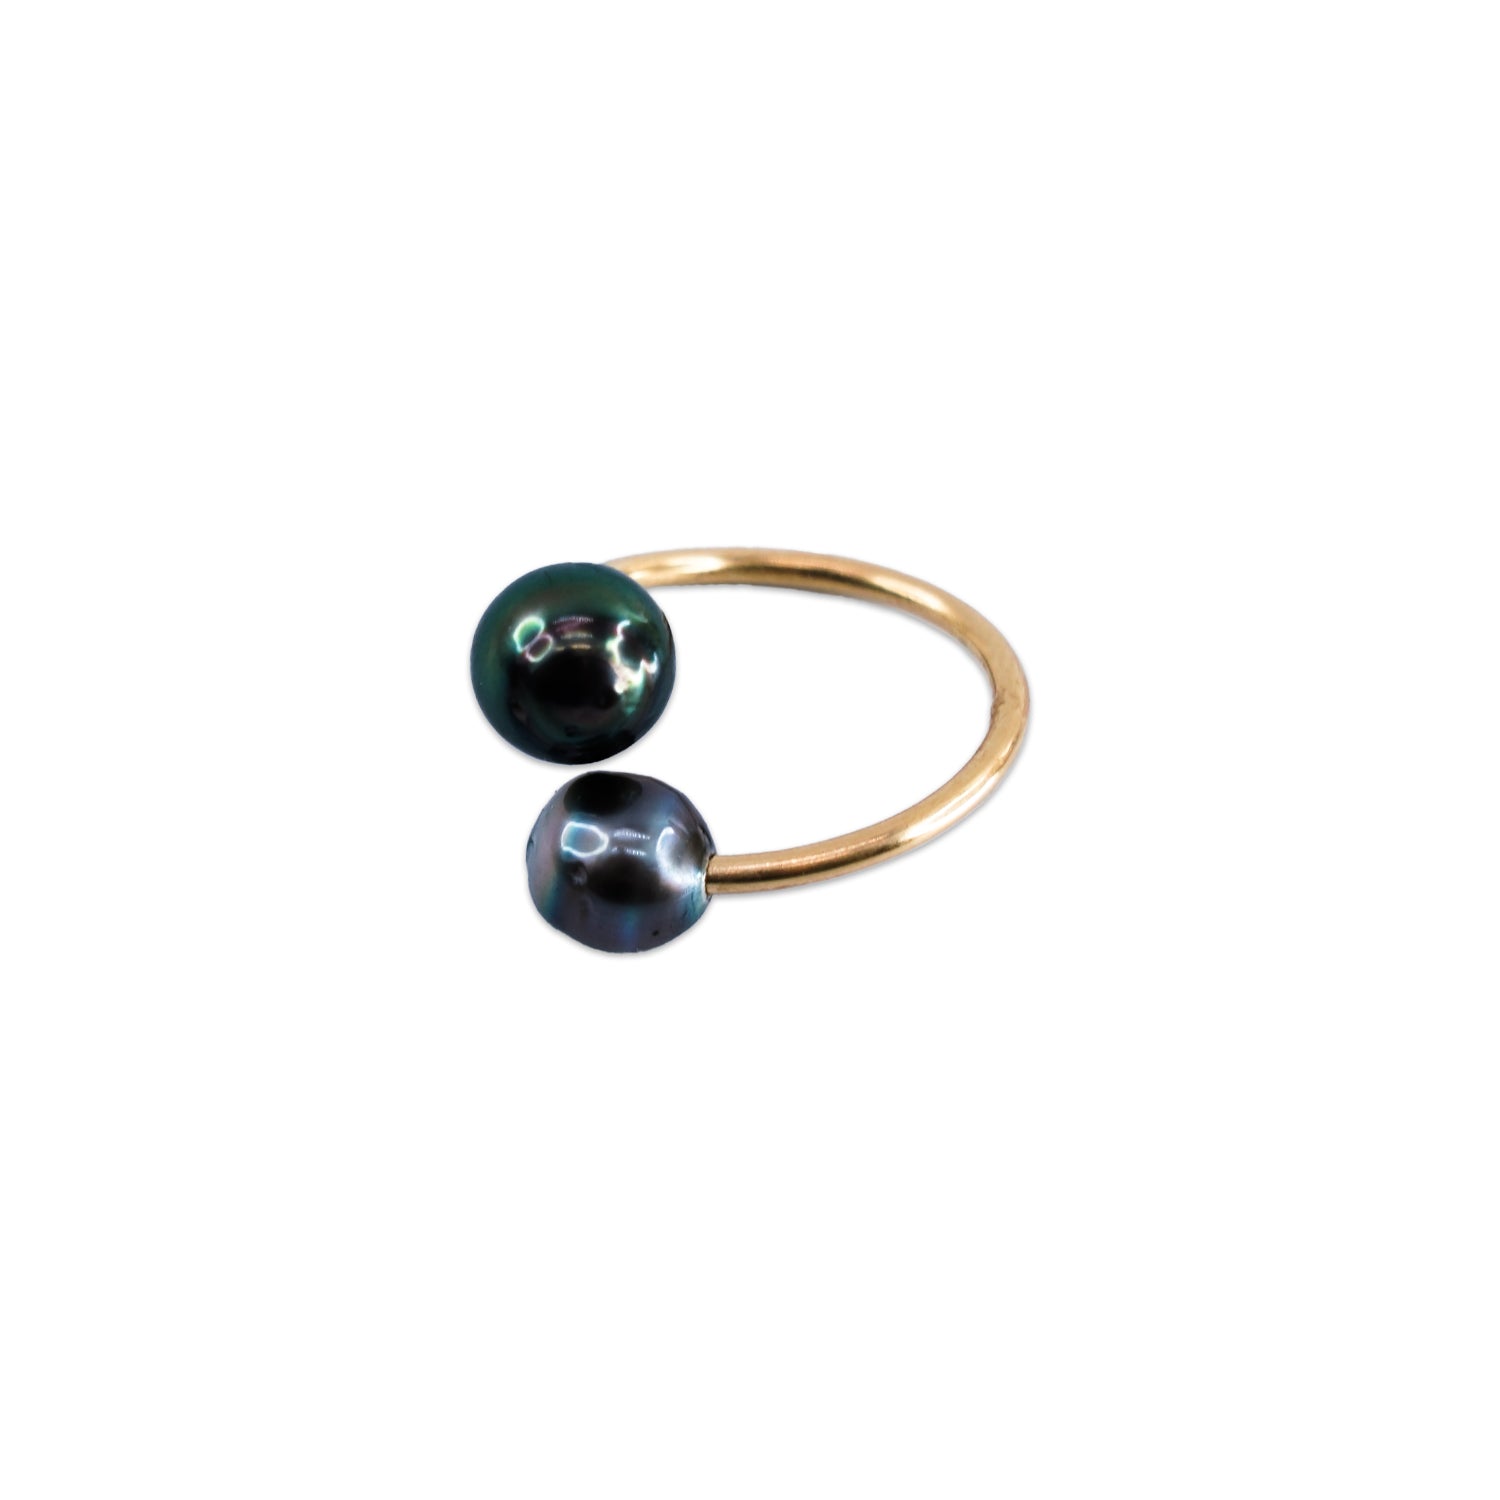 Authentic Tahitian Black Pearl Bypass Ring - Gold Filled